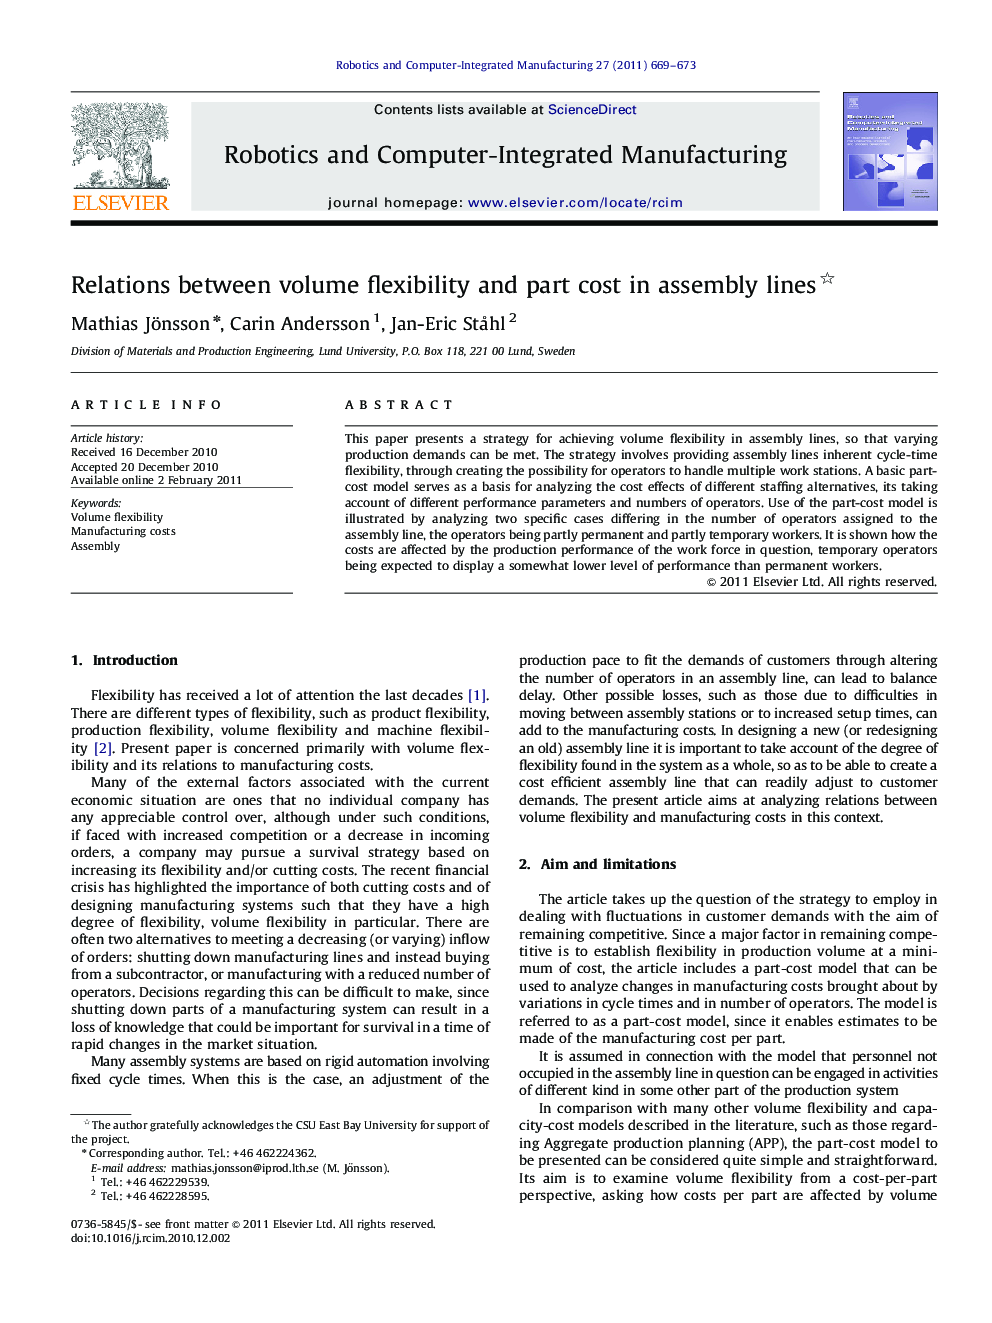 Relations between volume flexibility and part cost in assembly lines 